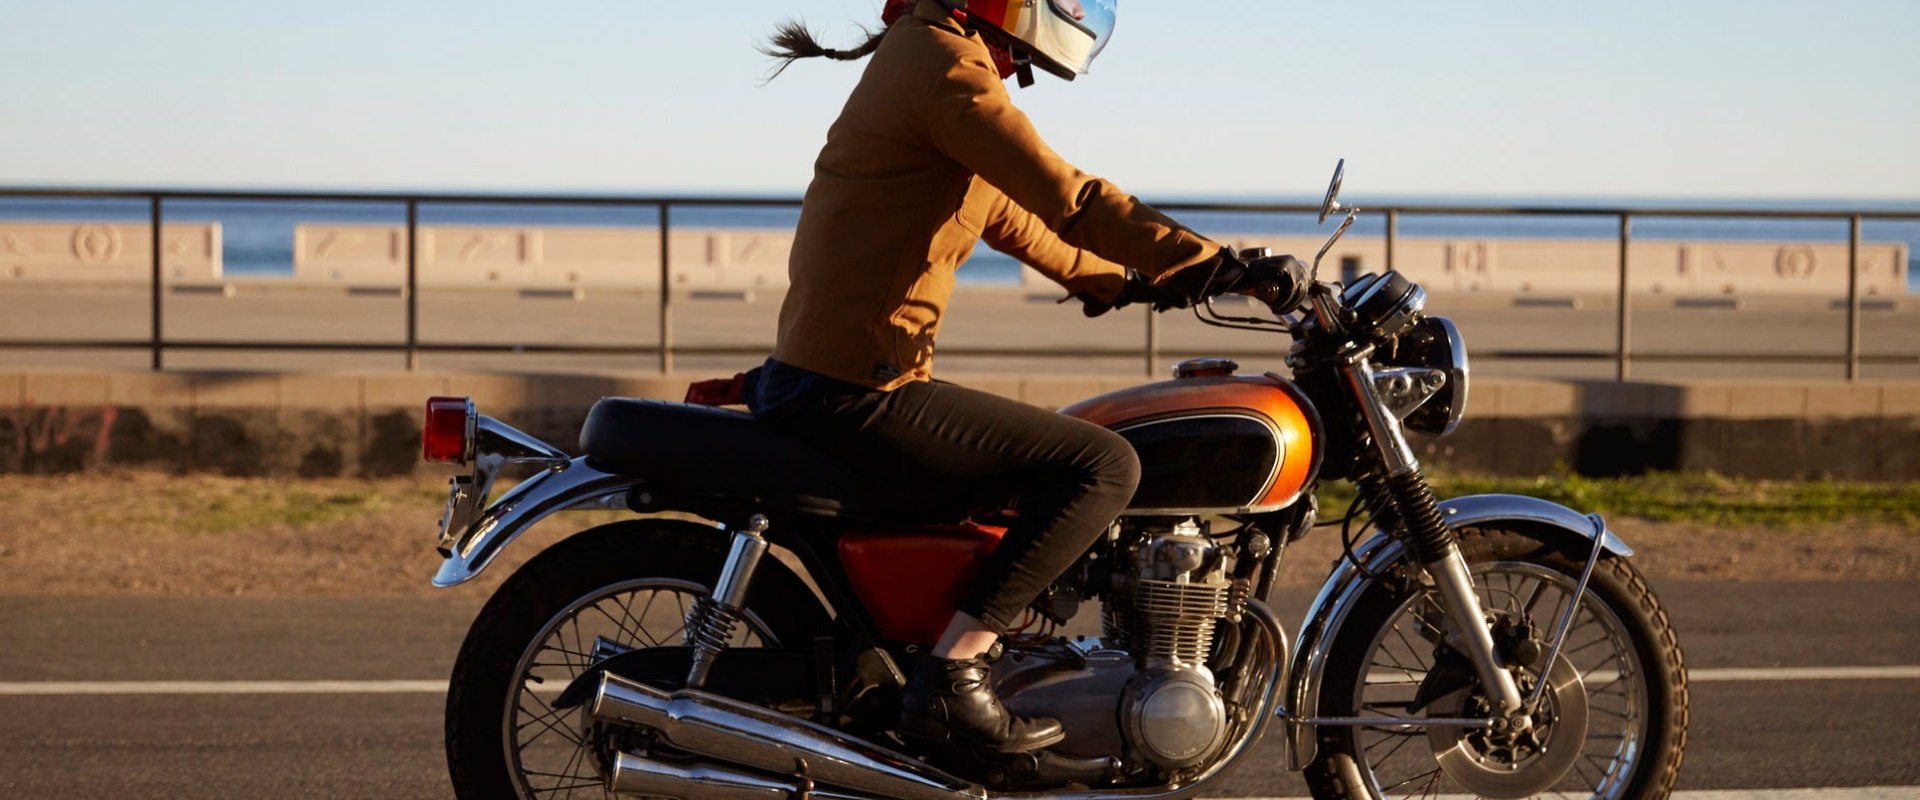 How Much Does Motorcycle Insurance Cost For A 16 Year Old In Colorado?